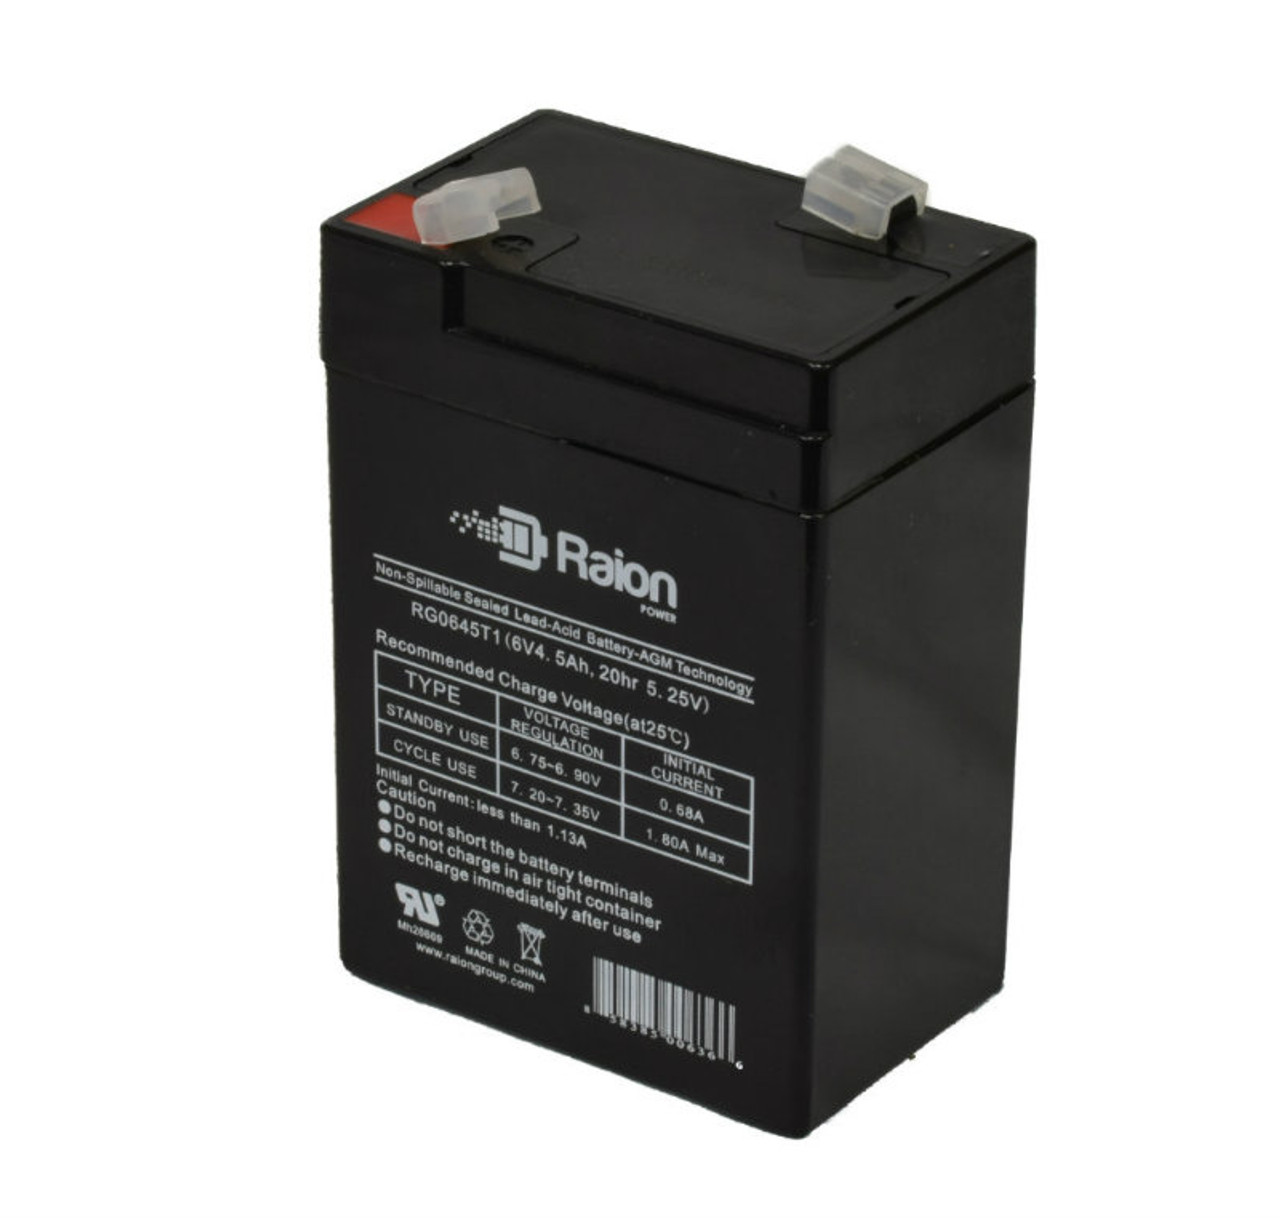 Raion Power RG0645T1 6V 4.5Ah Replacement Battery Cartridge for Canbat CBL5.4-6